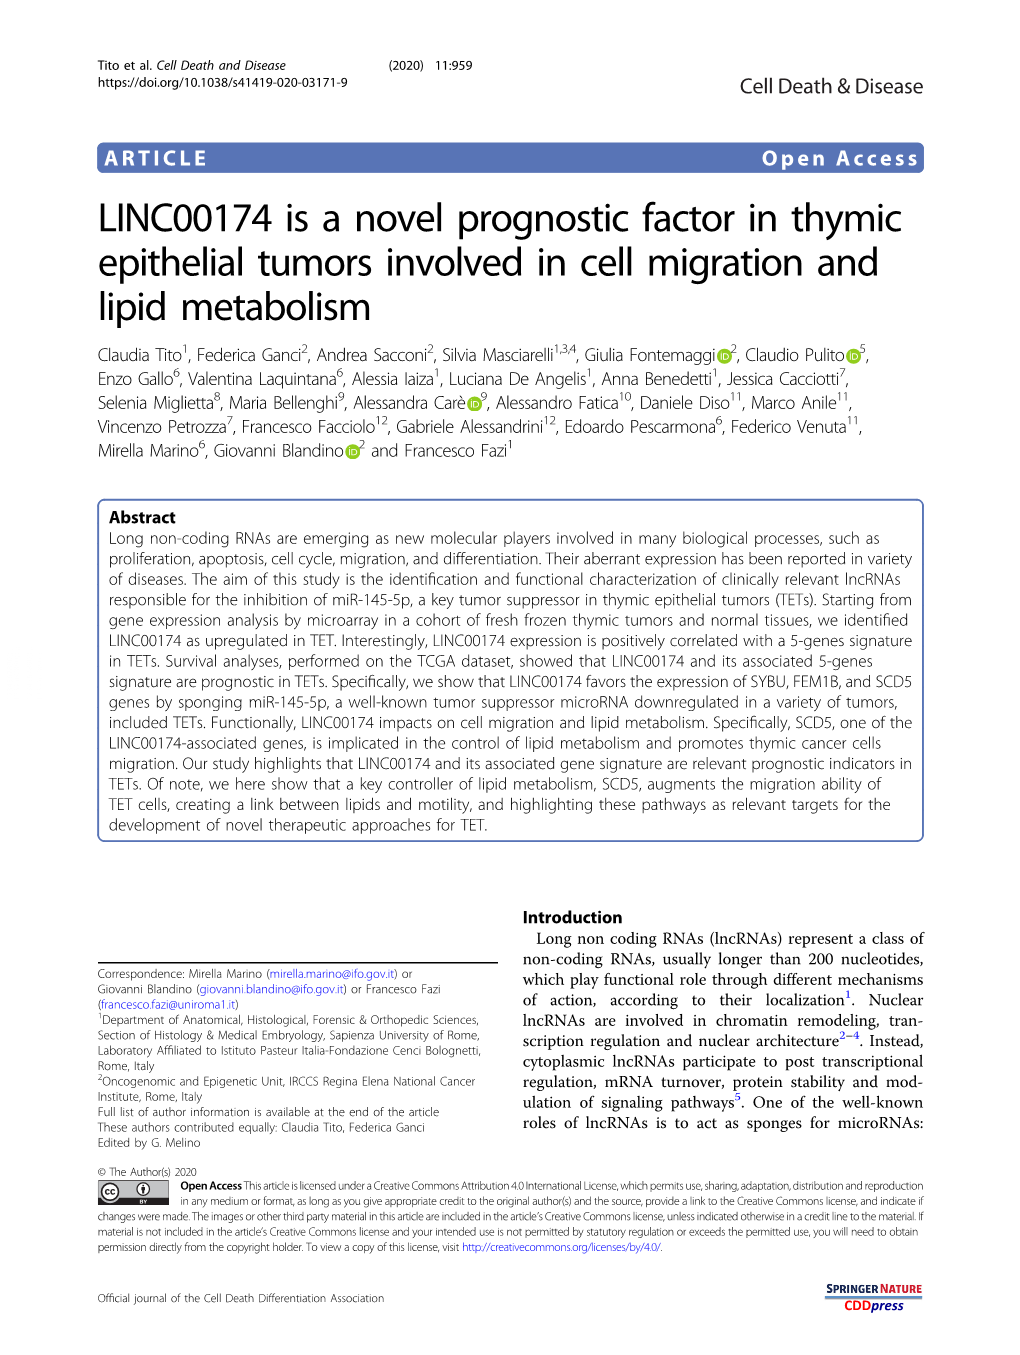 LINC00174 Is a Novel Prognostic Factor in Thymic Epithelial Tumors